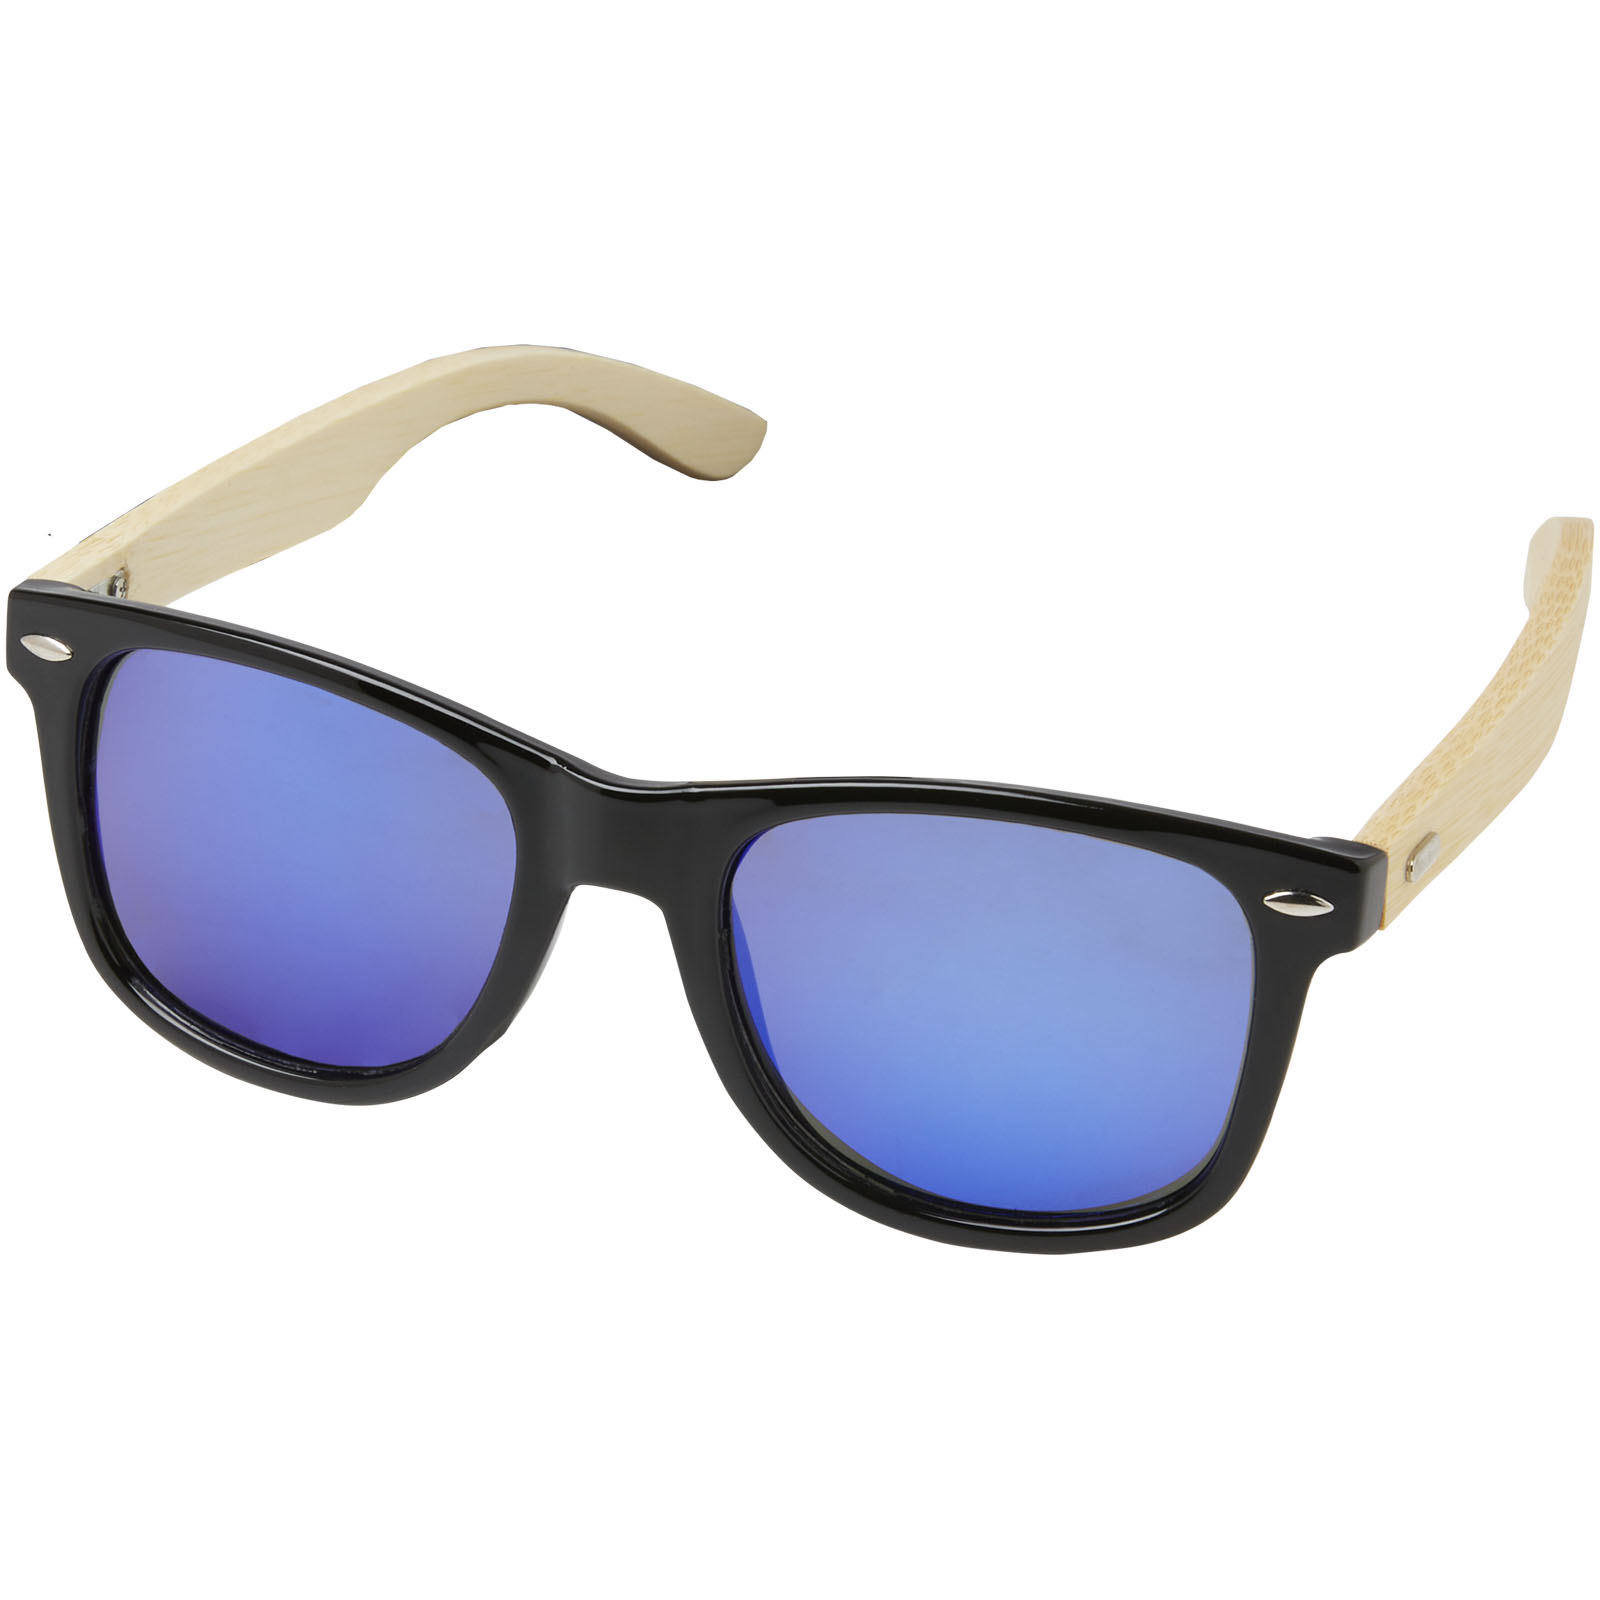 Sports & Leisure - Taiyō rPET/bamboo mirrored polarized sunglasses in gift box